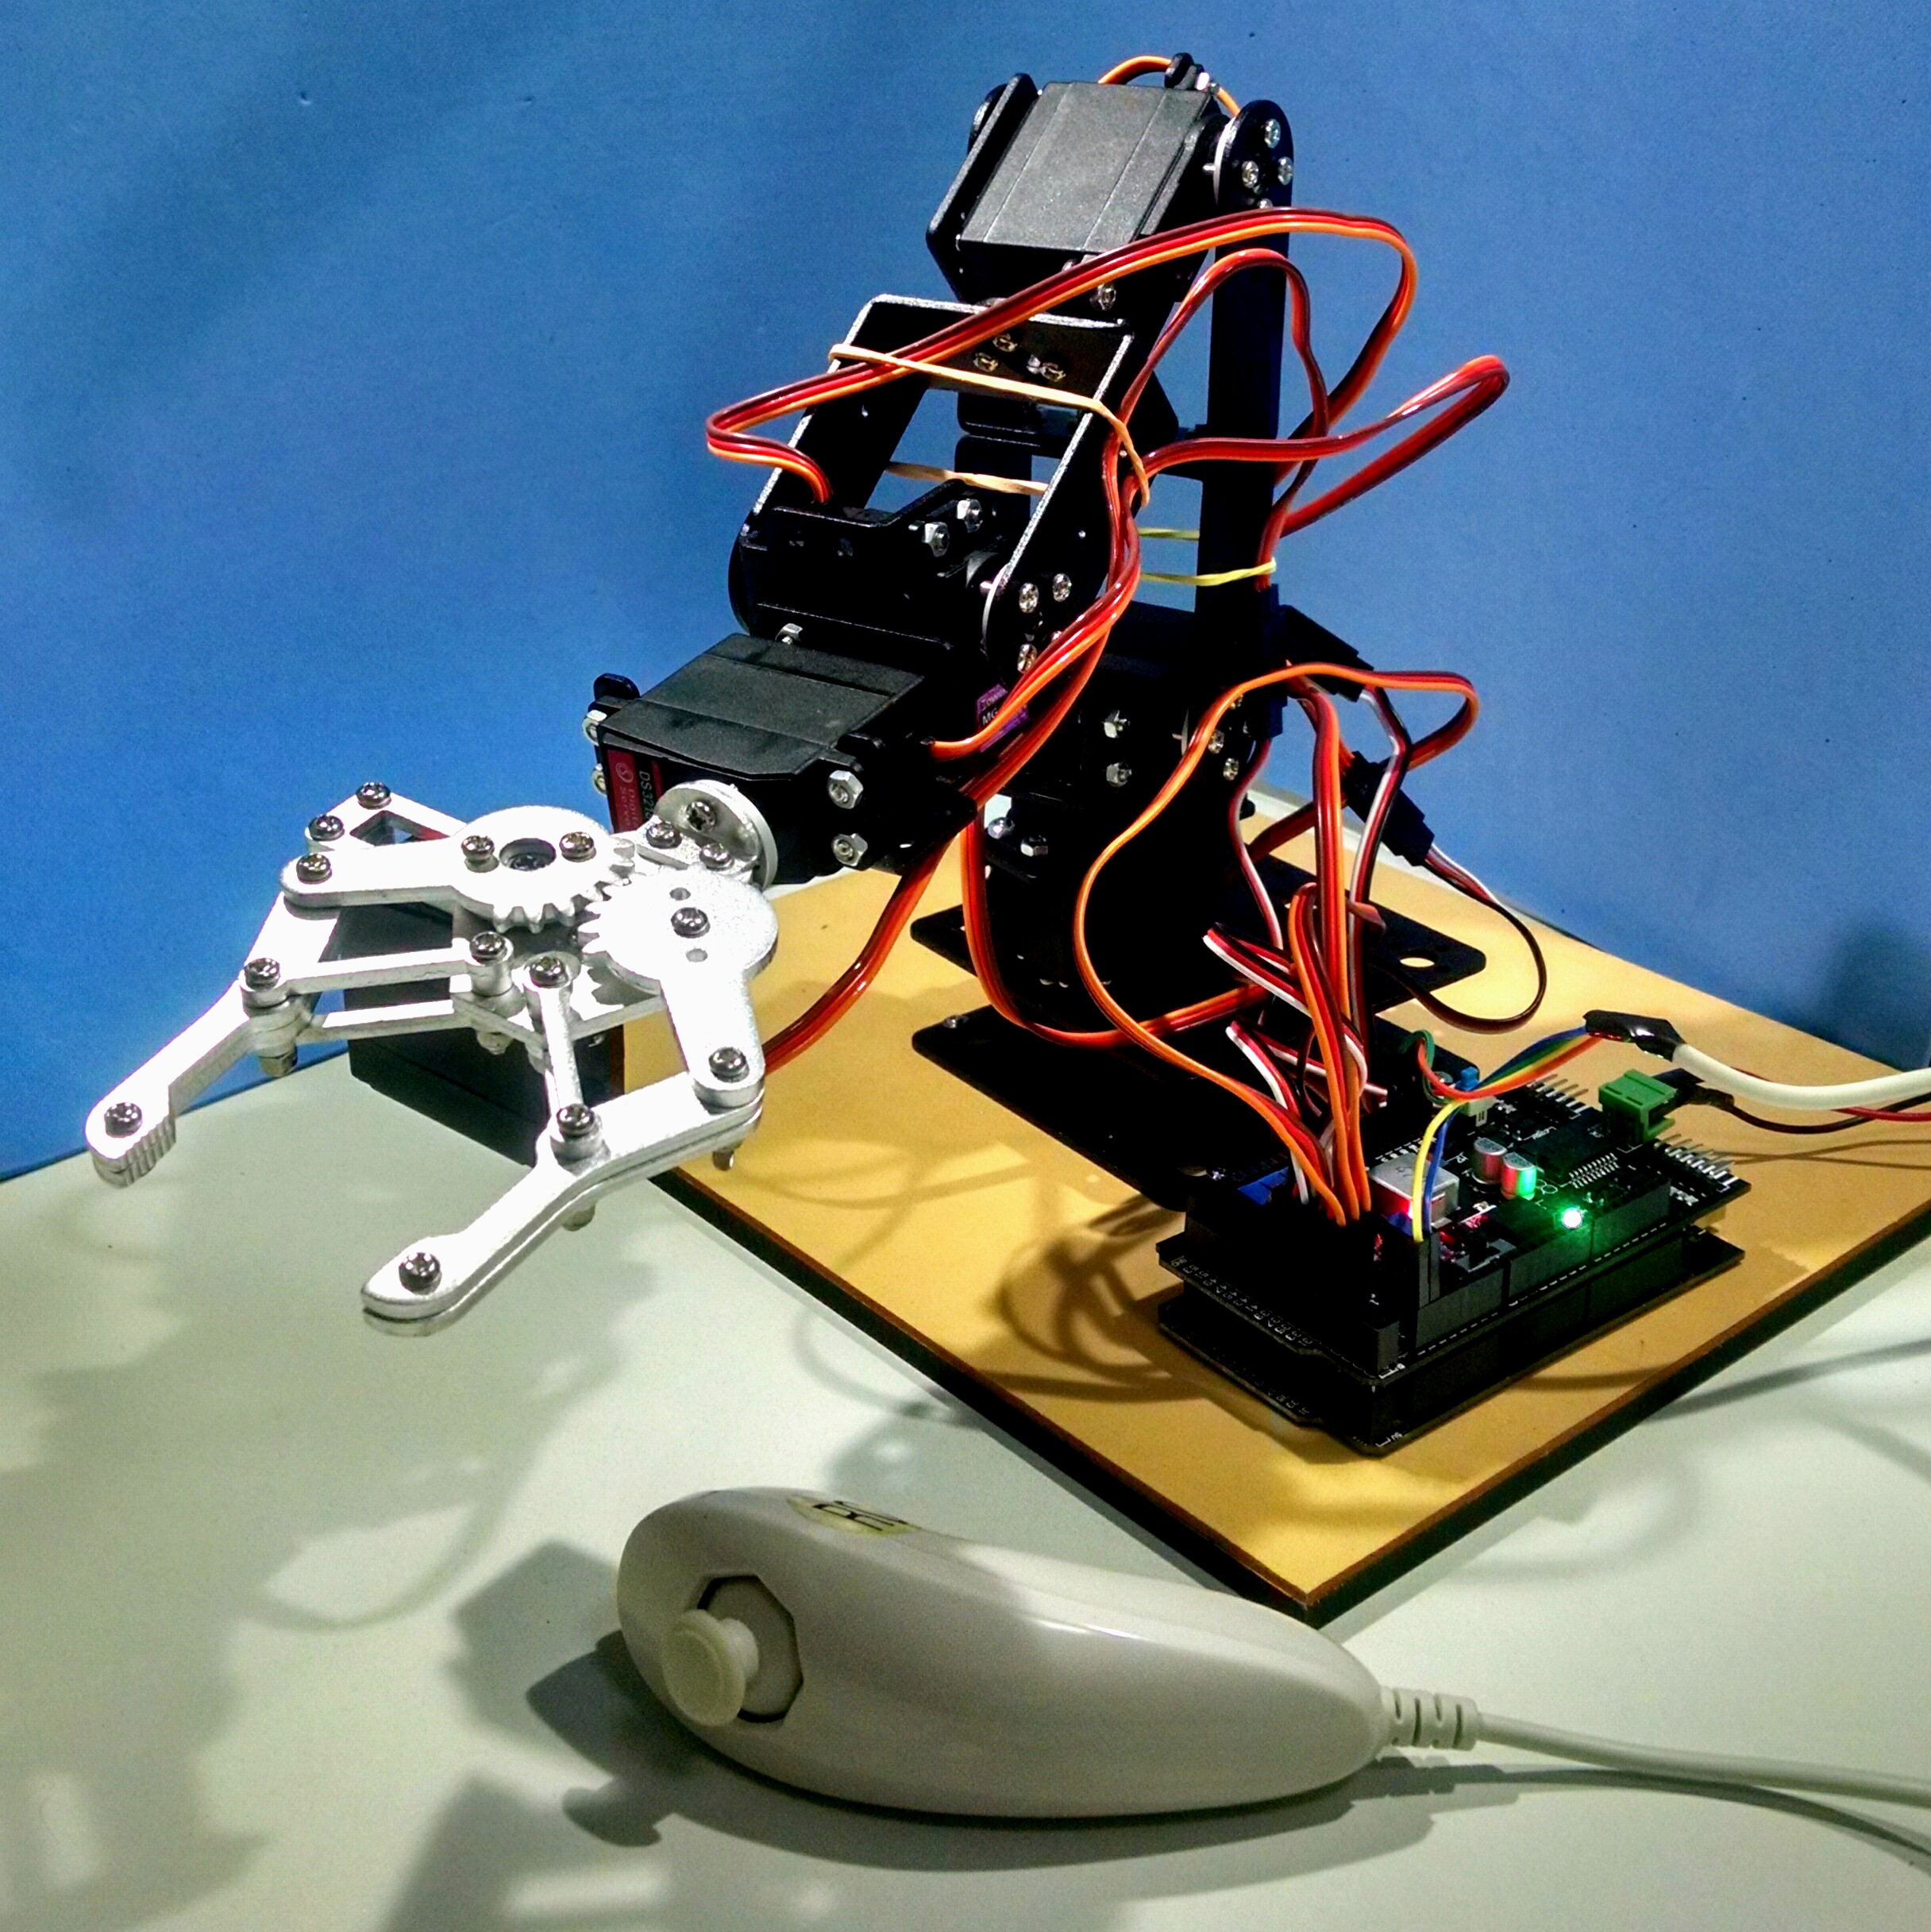 arduino projects robot arm